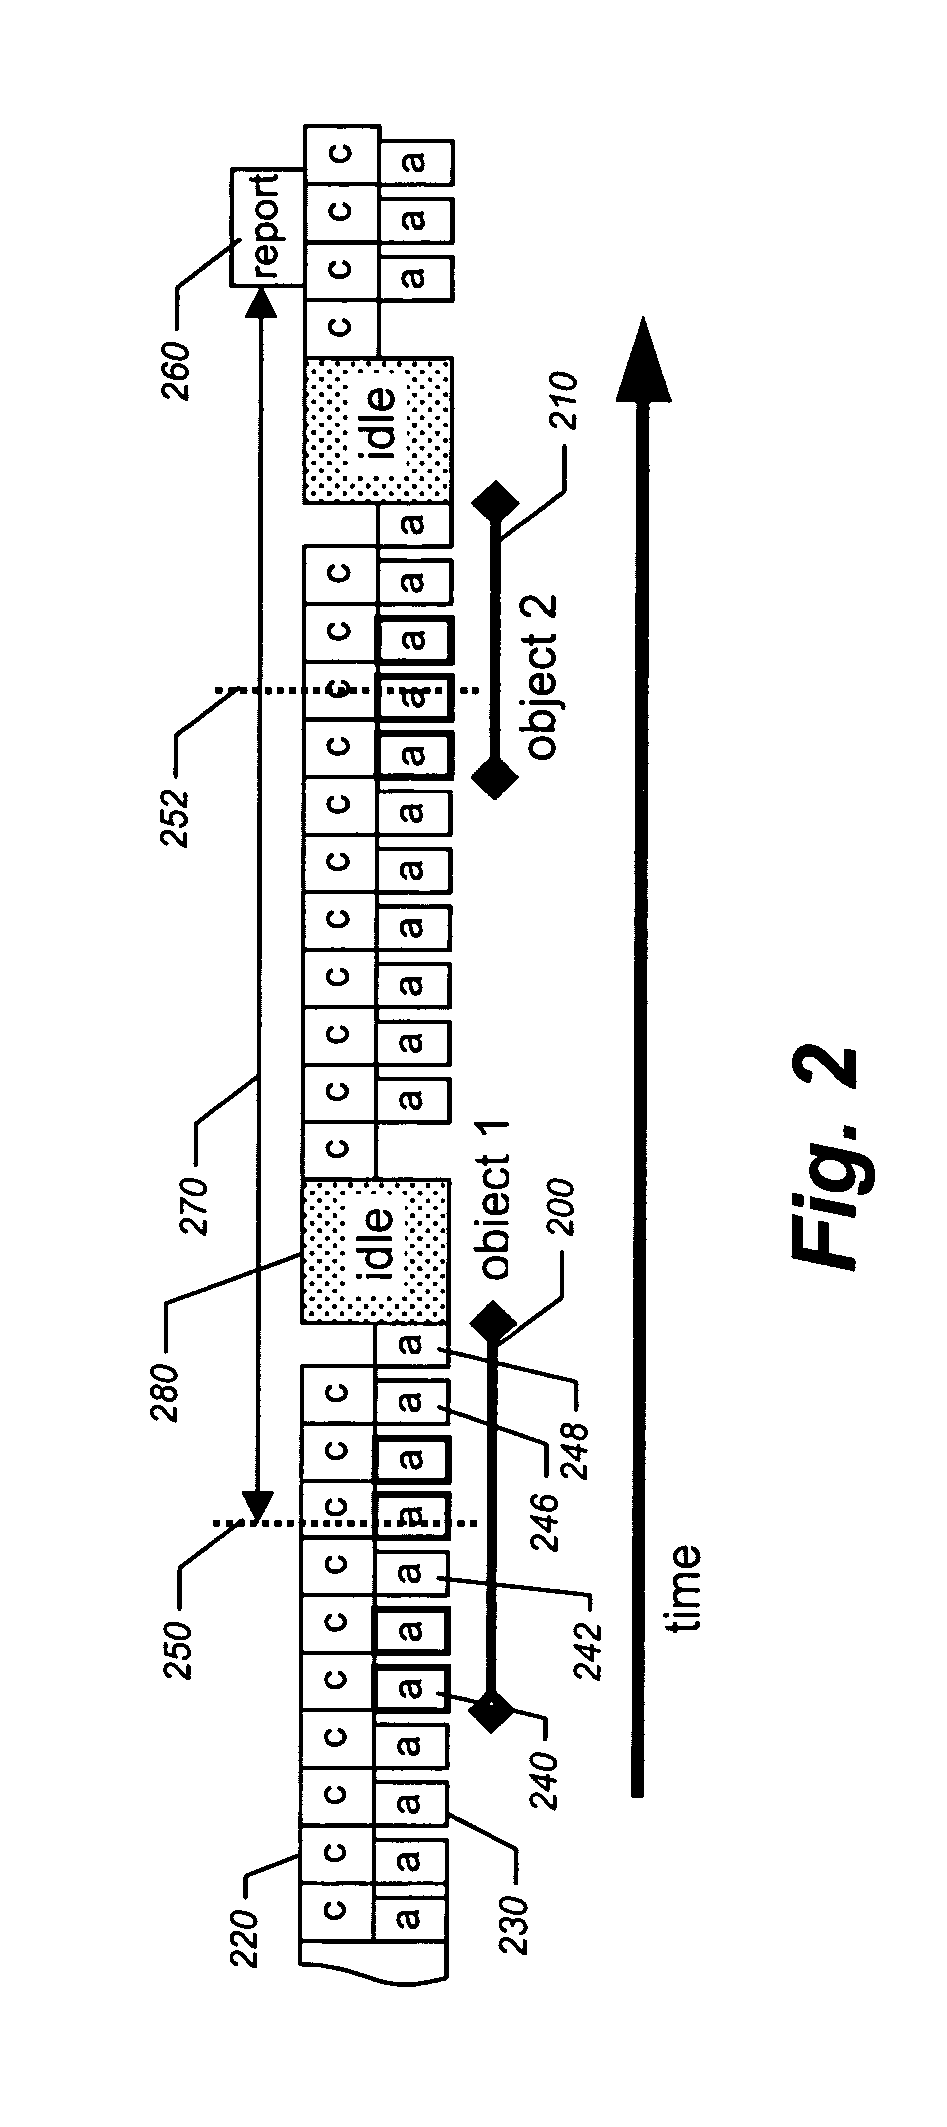 System and method for displaying and using non-numeric graphic elements to control and monitor a vision system